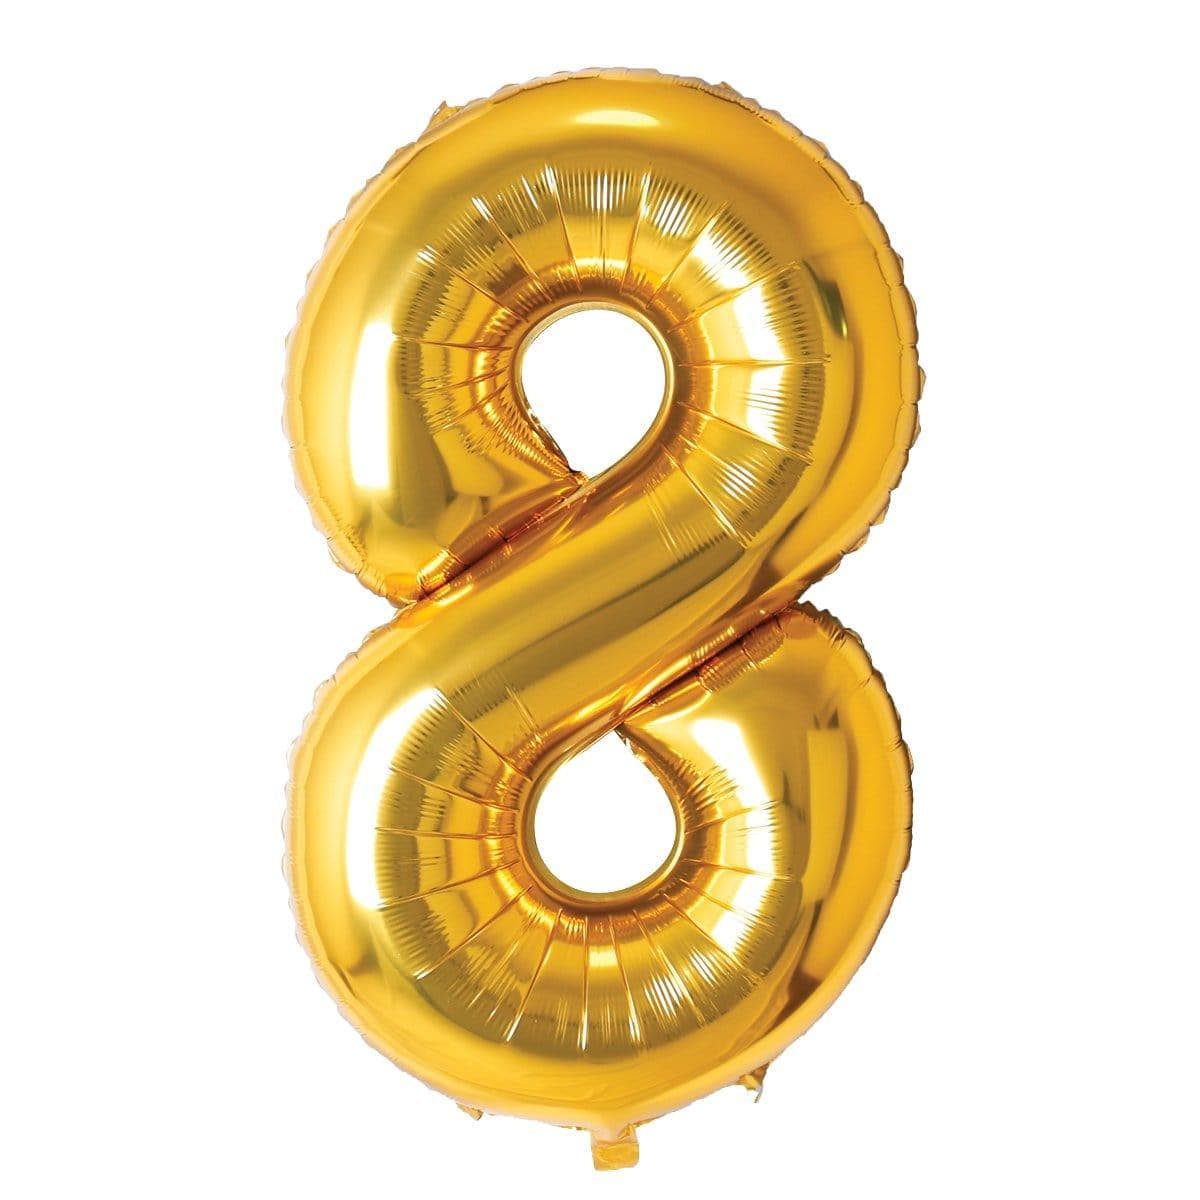 Buy Balloons Gold Number 8 Foil Balloon, 34 Inches sold at Party Expert